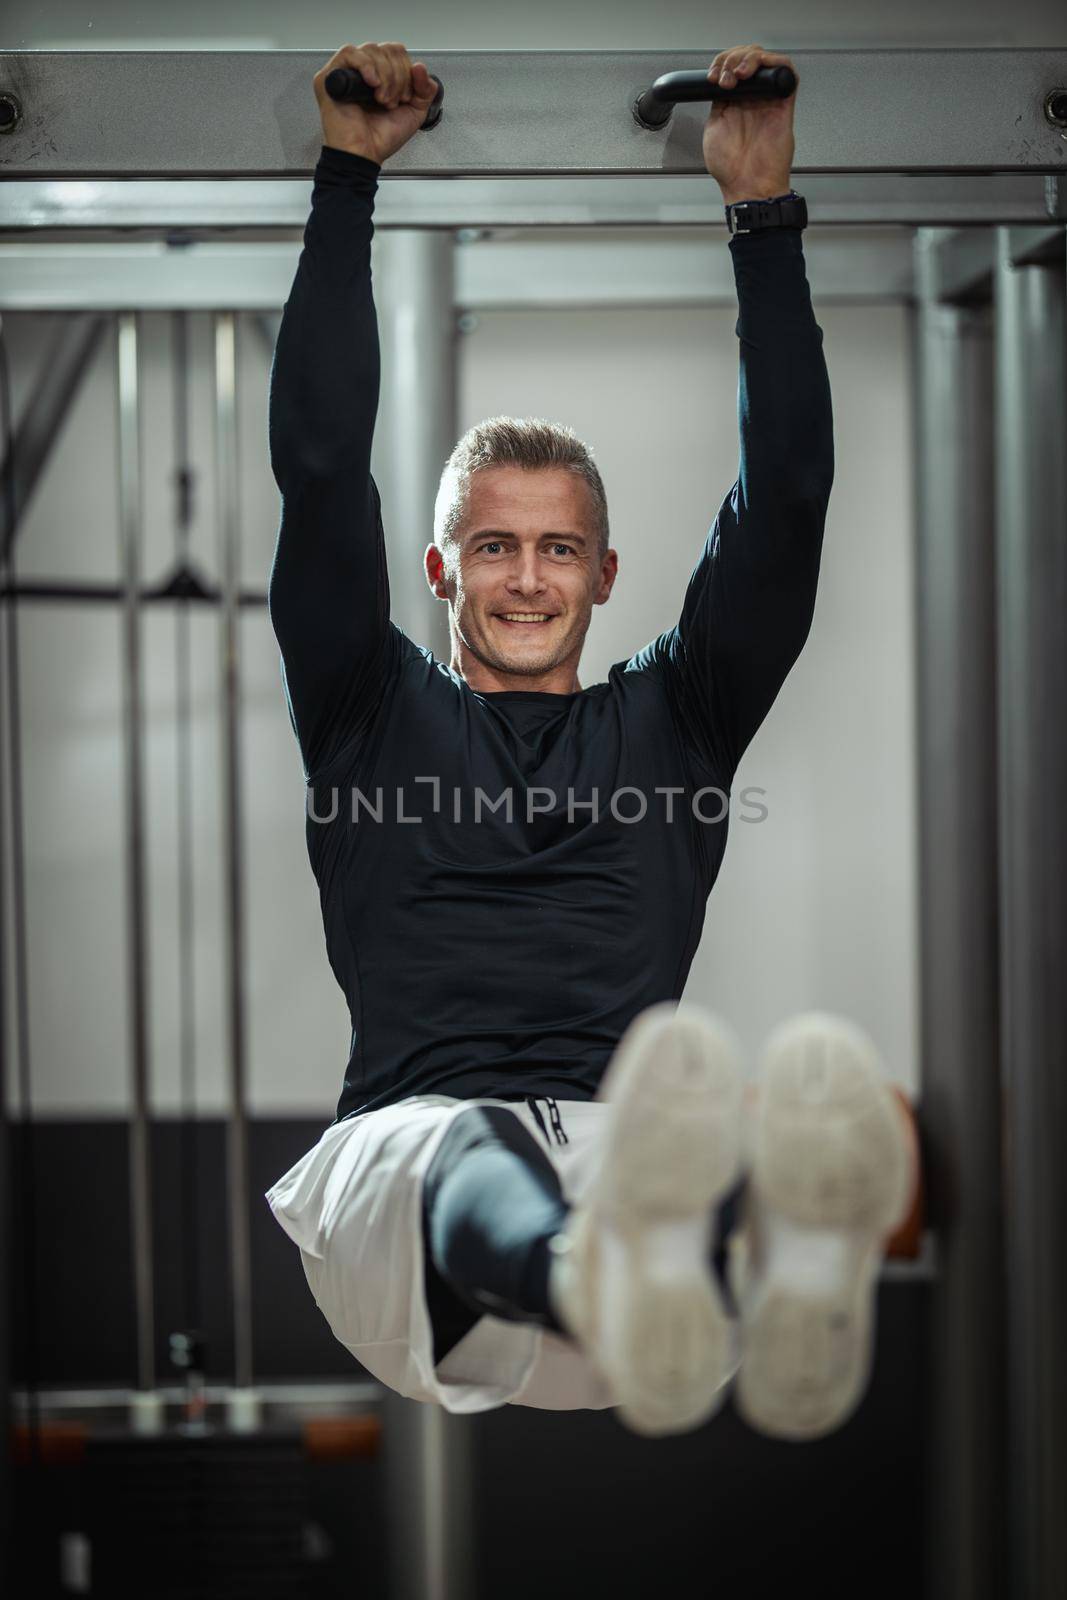 Muscular young man in sportswear focused on doing sit-up exercises during a strength training workout at the gym.